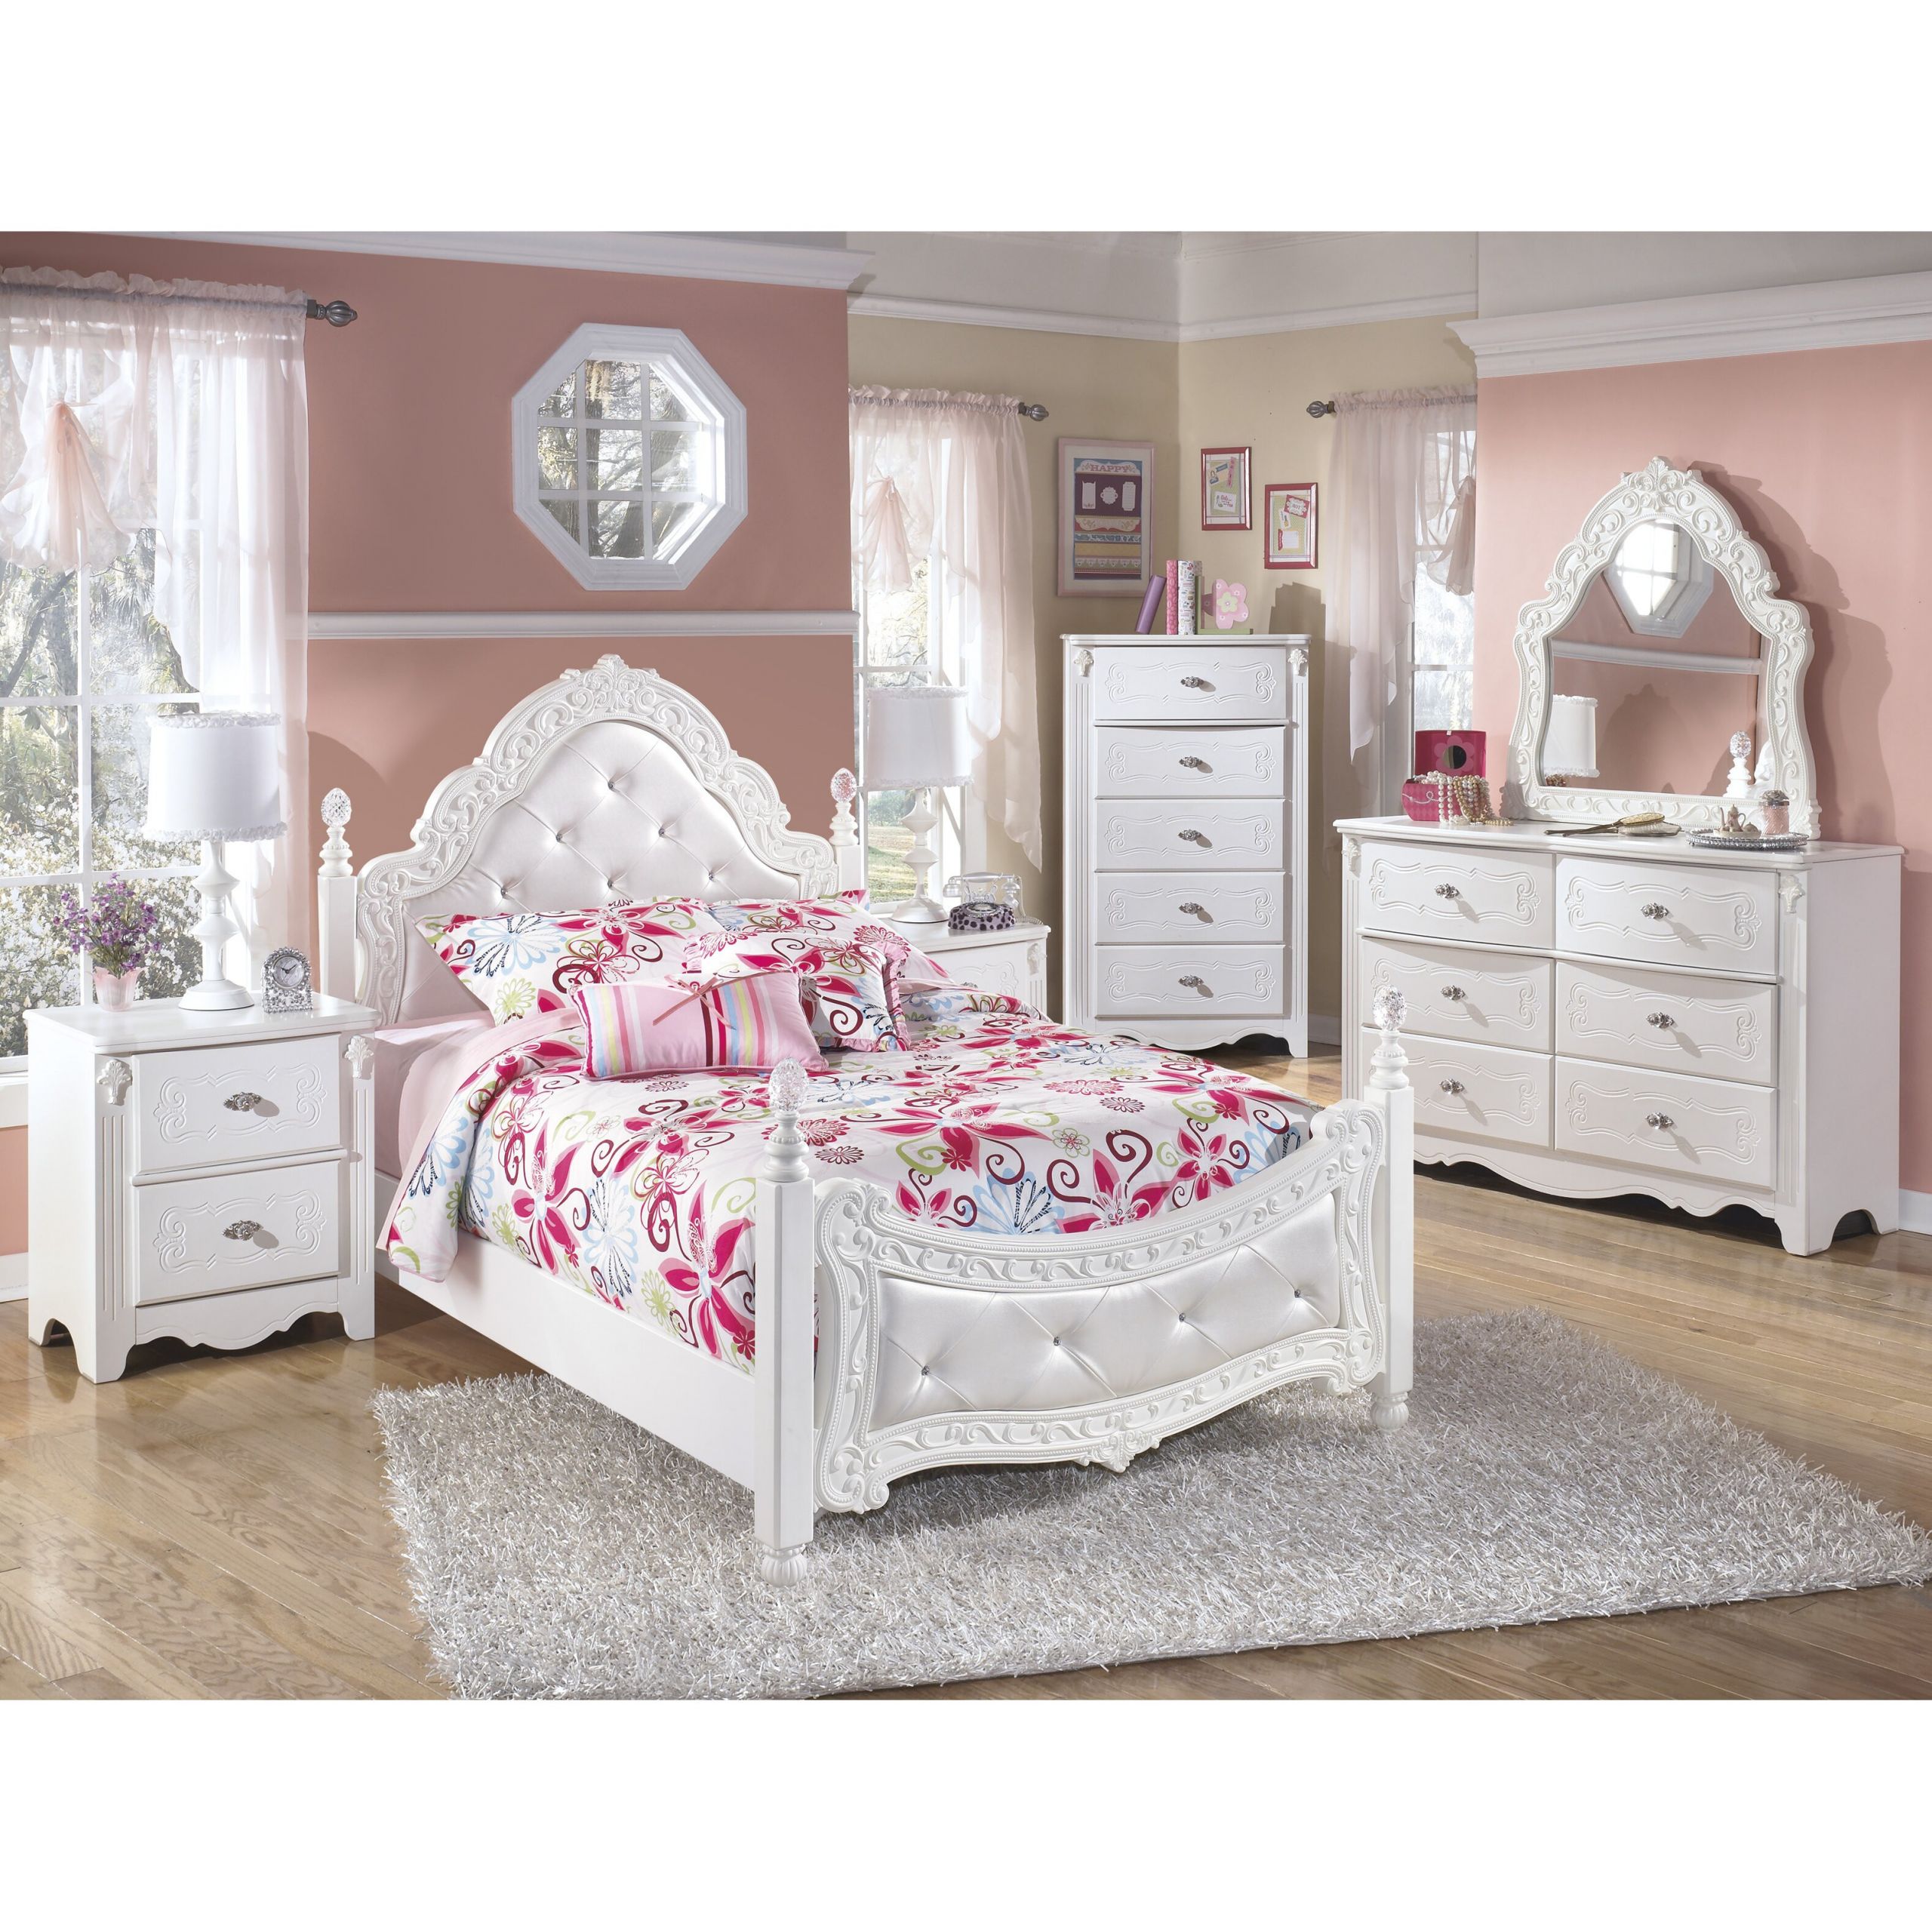 Toddler Girl Bedroom Furniture
 Signature Design by Ashley Exquisite Four Poster